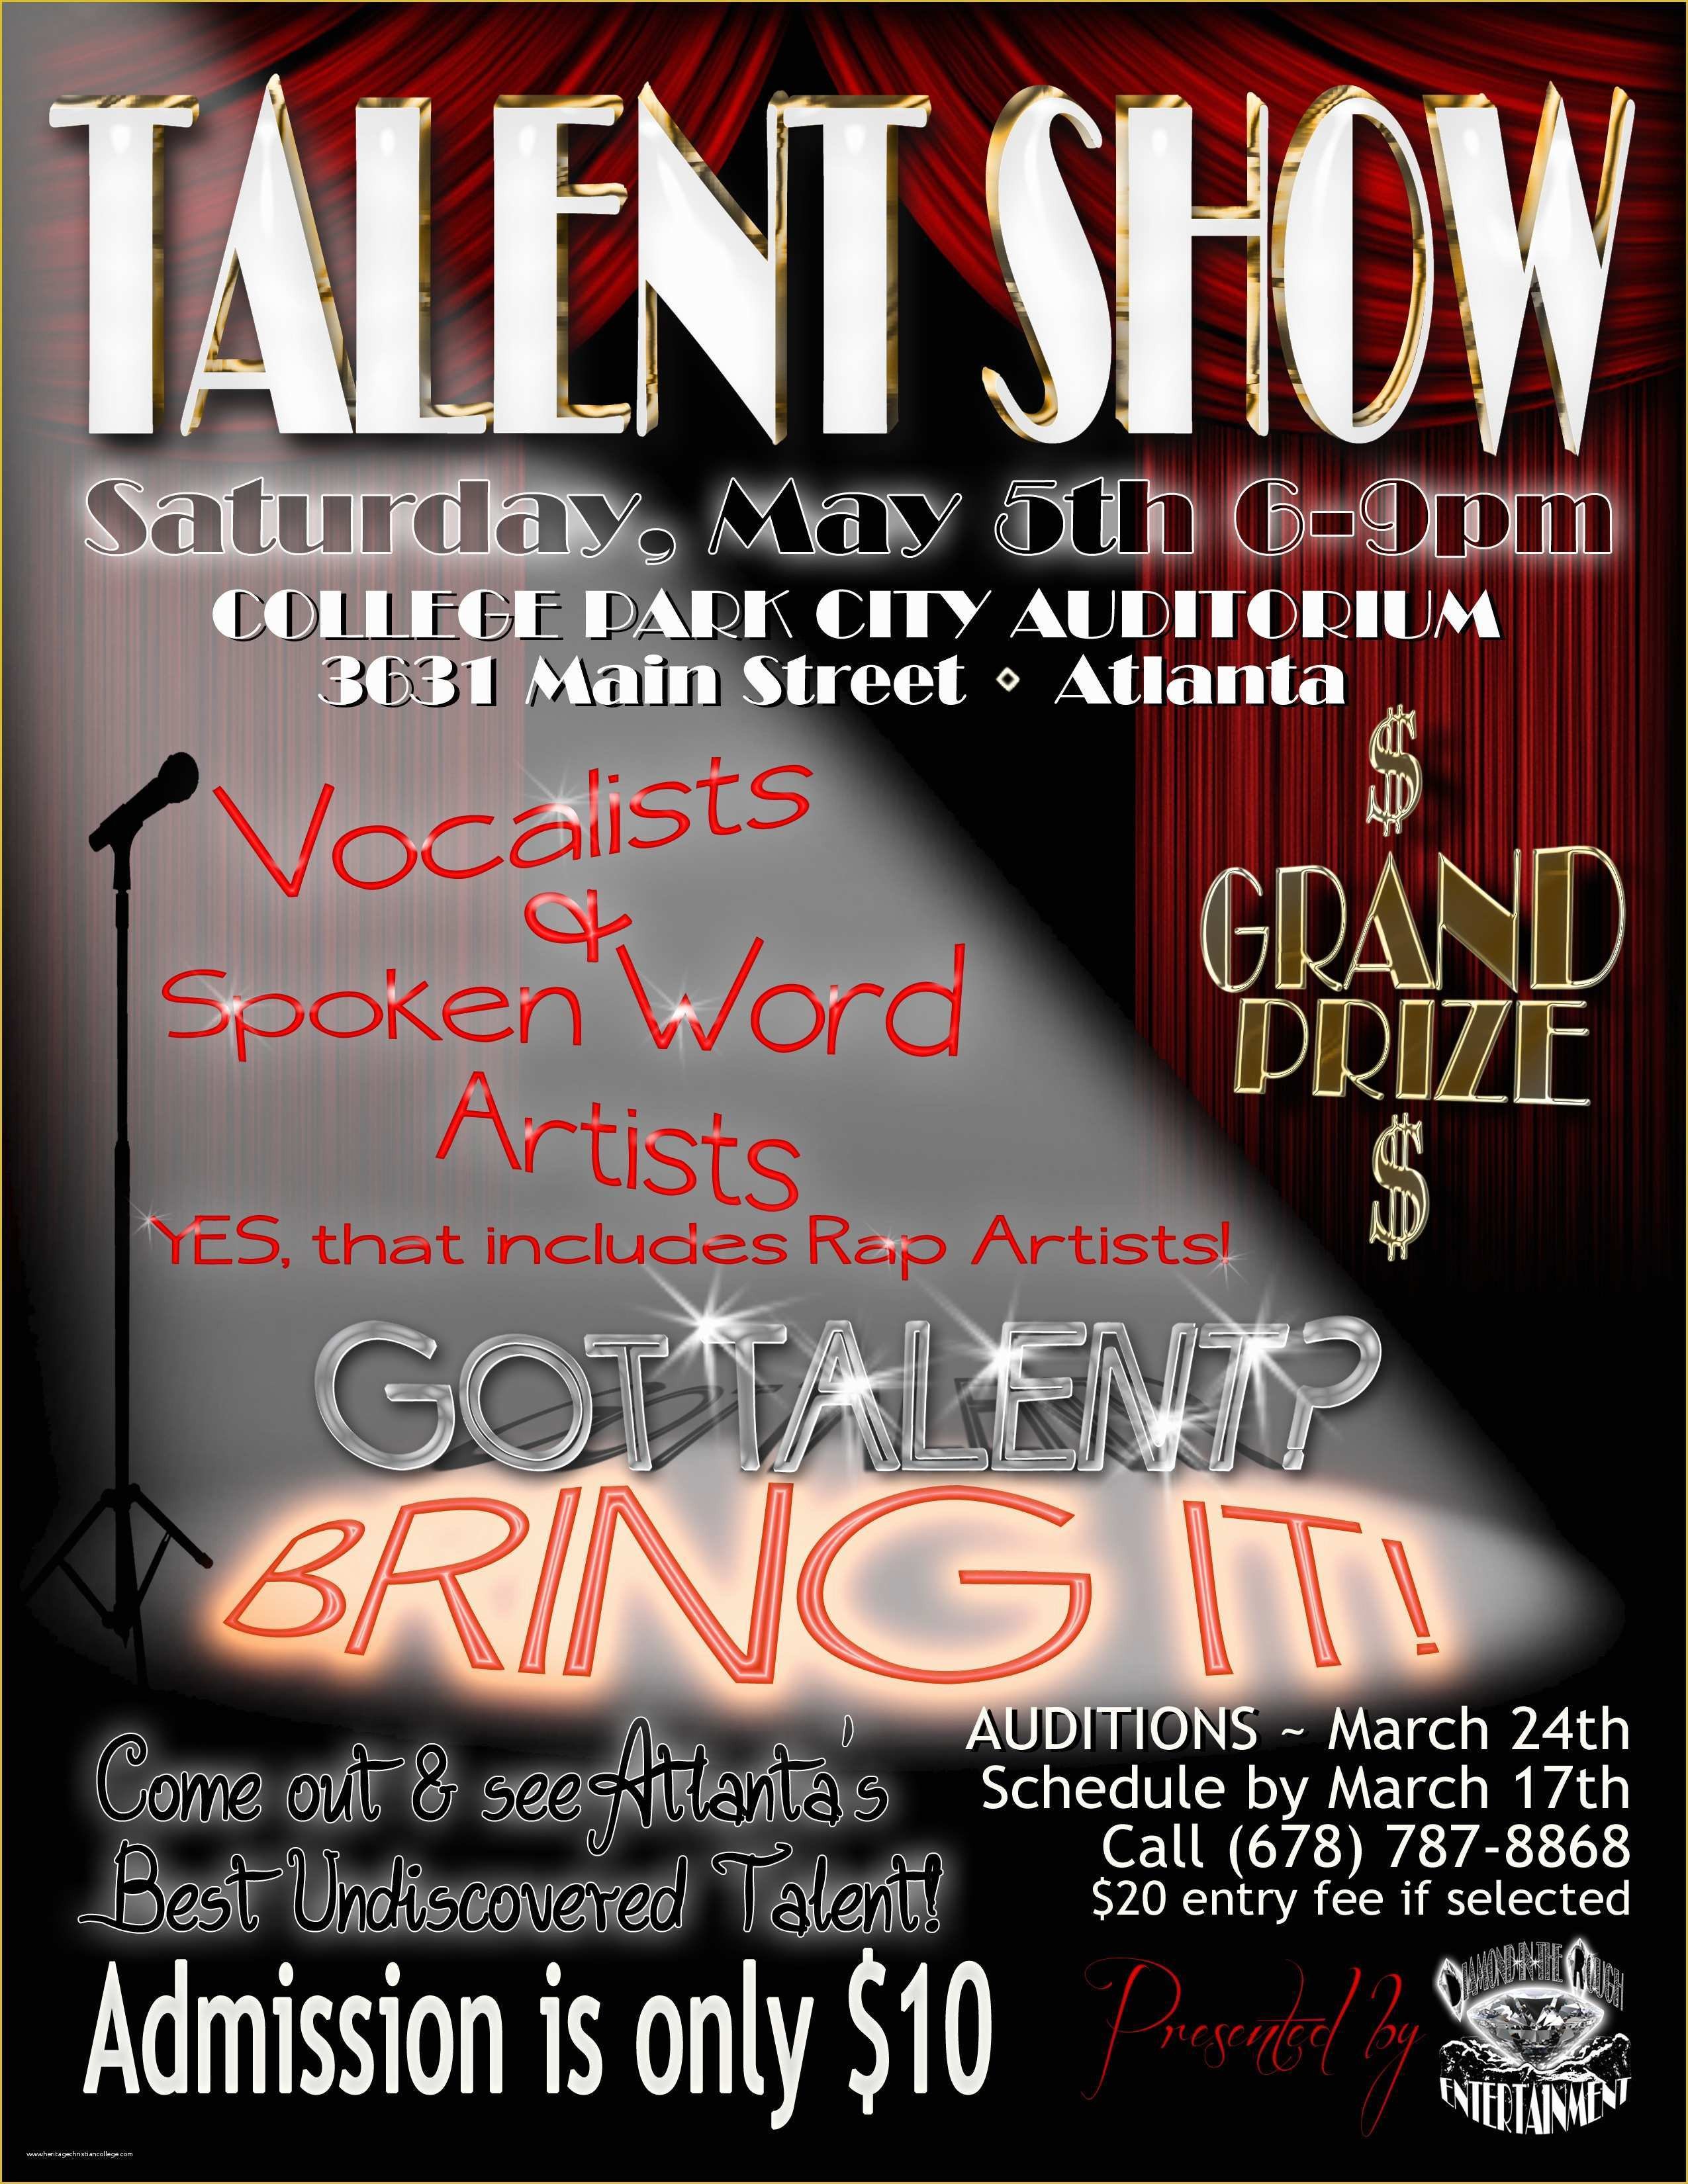 Talent Show Flyer Template Free Printable Talent Show Flyer Template 26 Talent